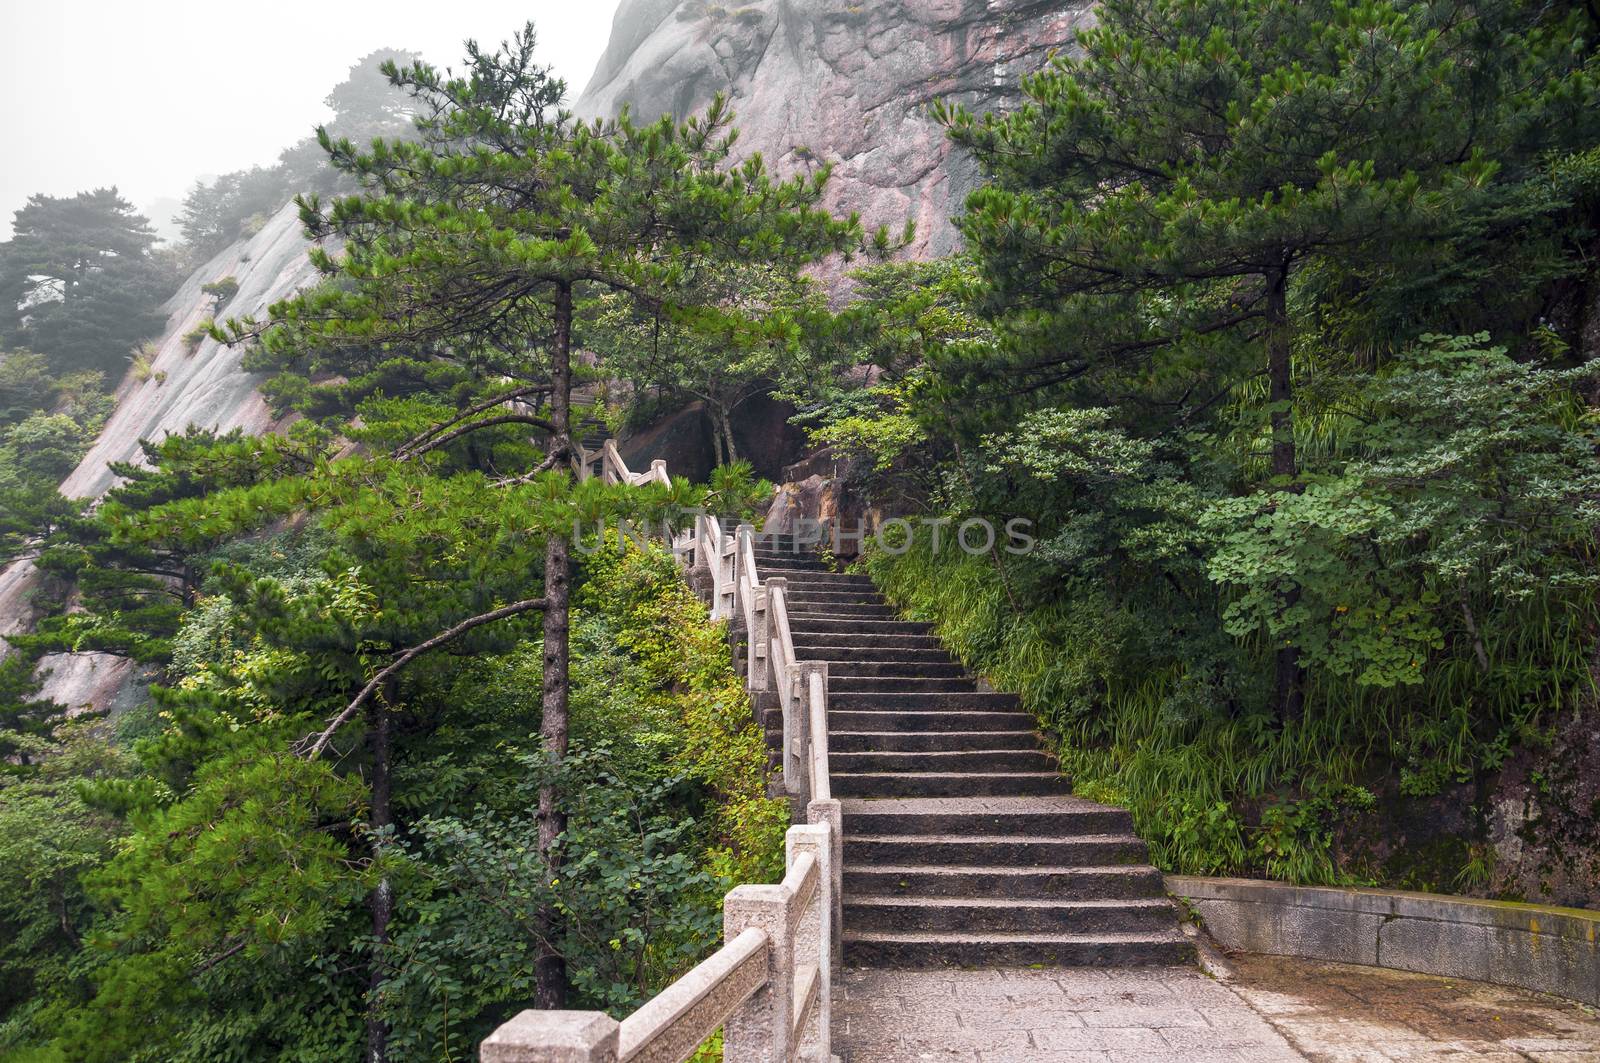 Mountain stairs path into forest, Huangshan, China